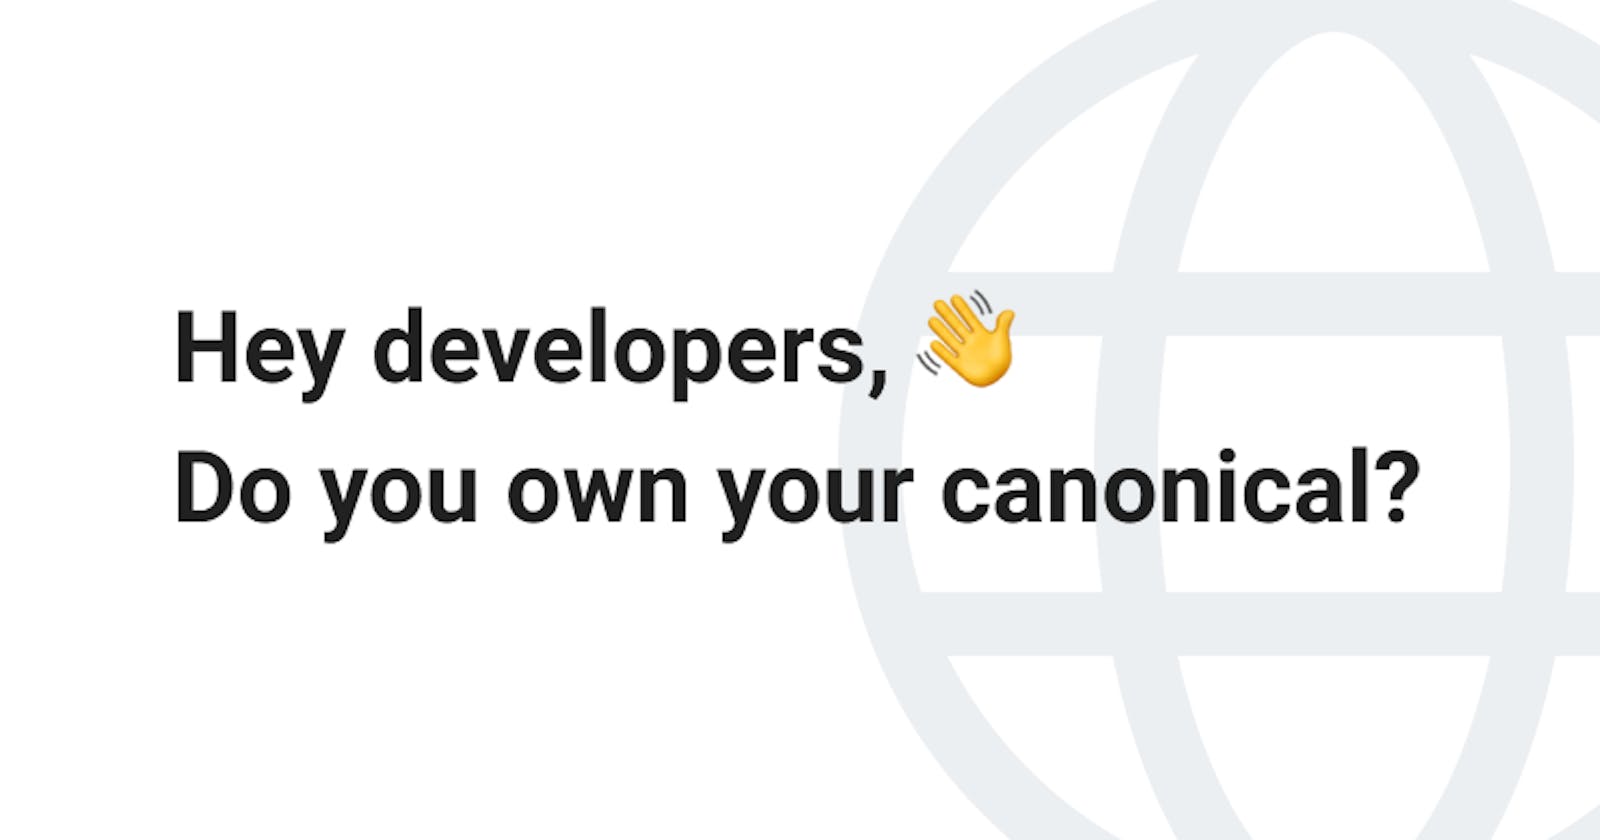 Hey developers, own your canonical!